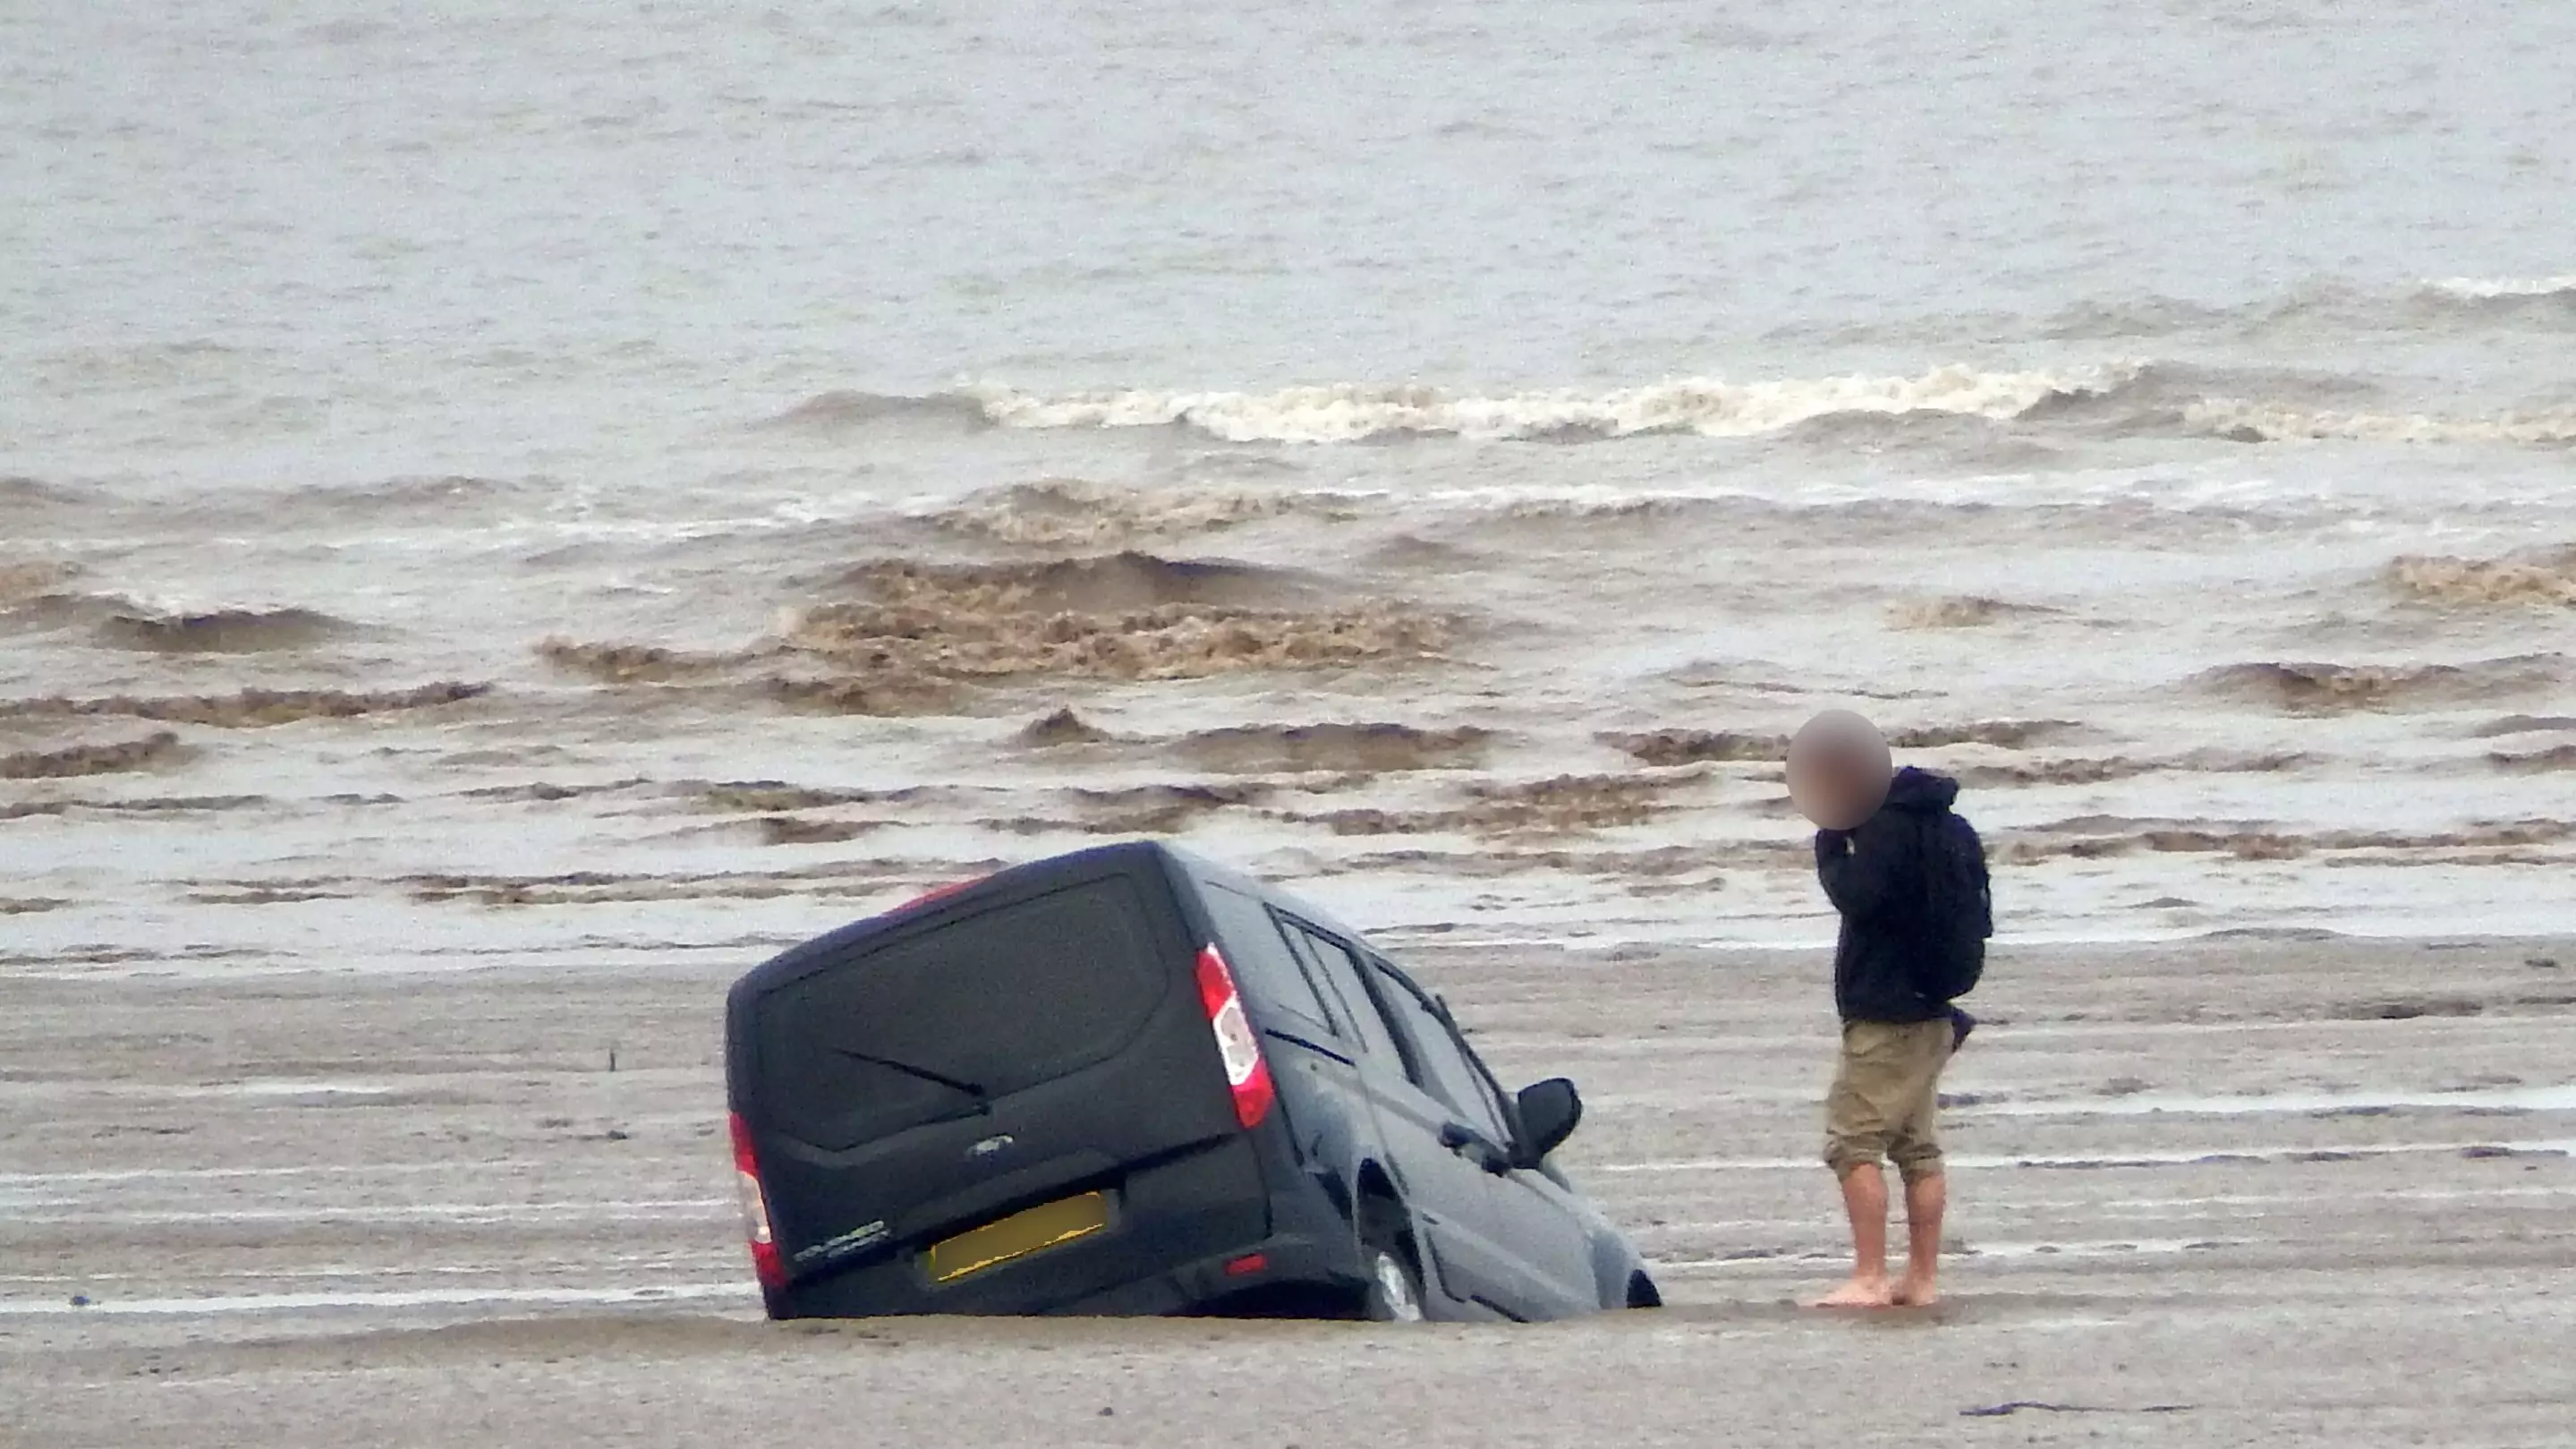 Man Helplessly Watches Van Sink Into Sea After Driving Onto Beach